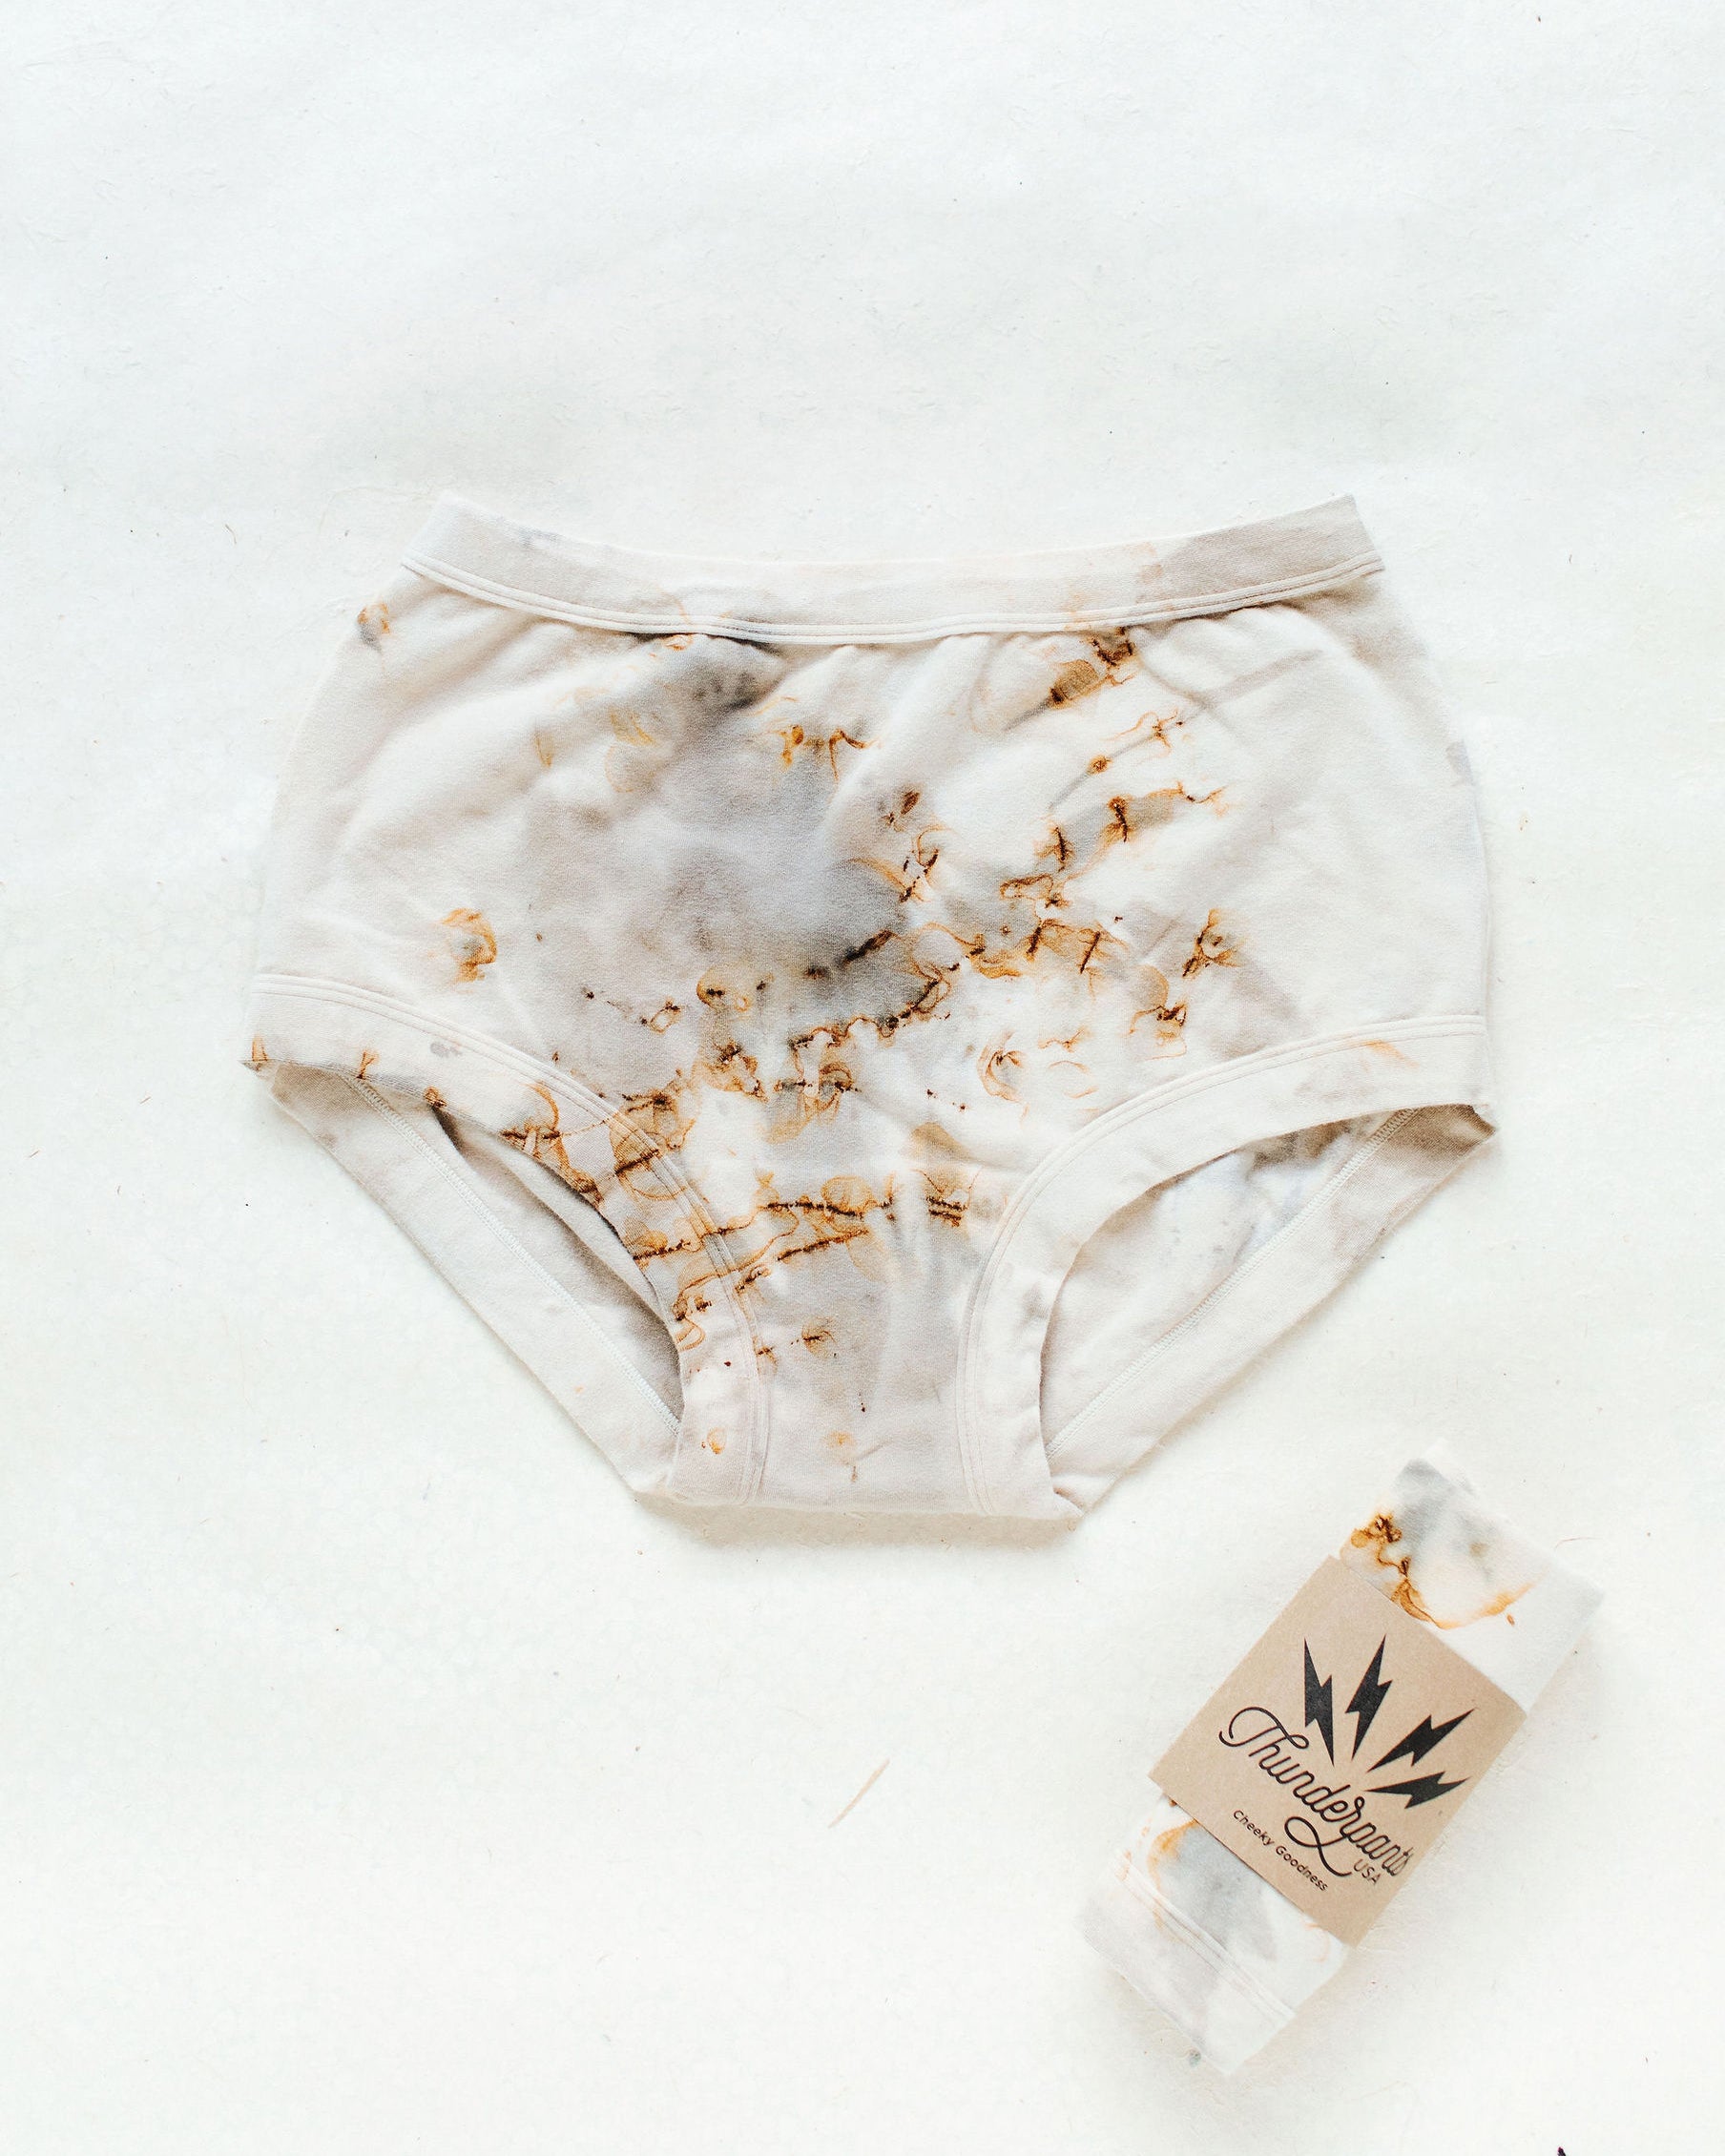 Flat lay of Thunderpants Original style underwear in Mineral Rust Dye.